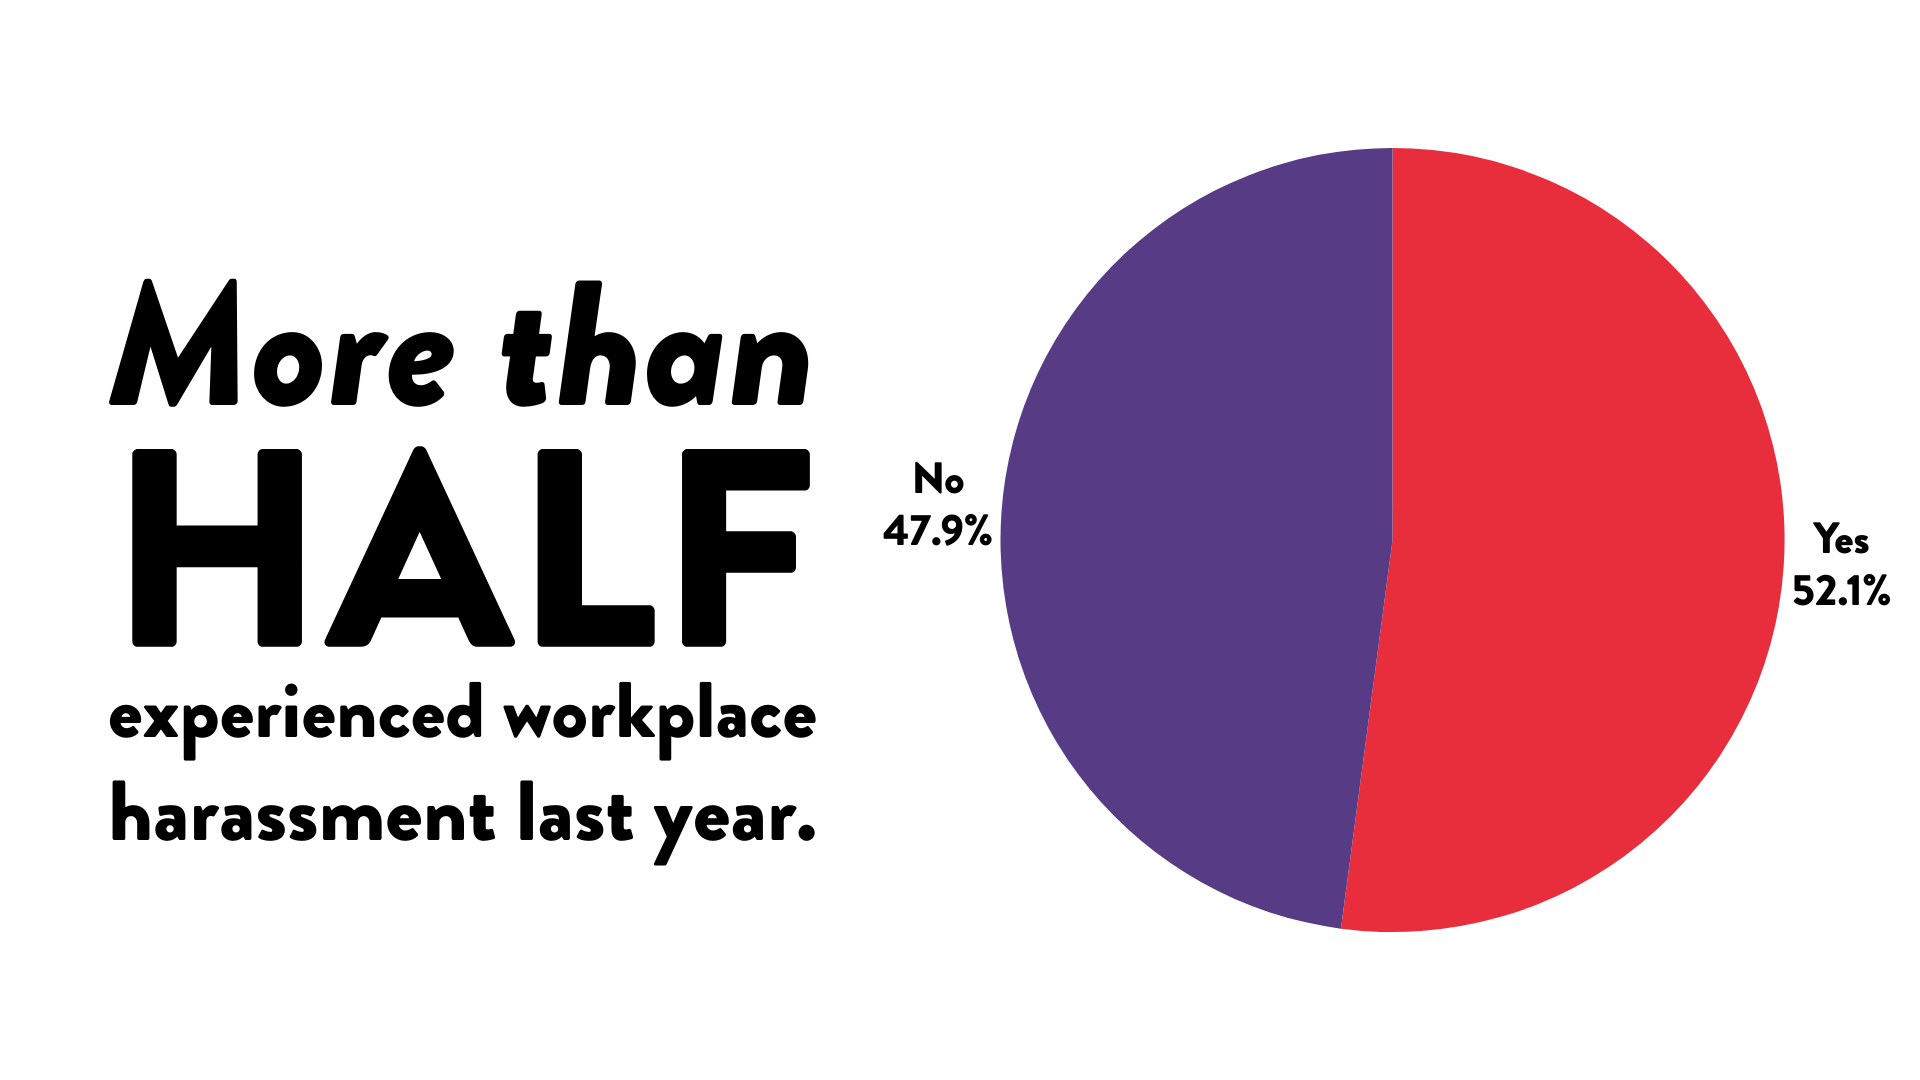 More than half of survey respondents experienced workplace harassment last year.